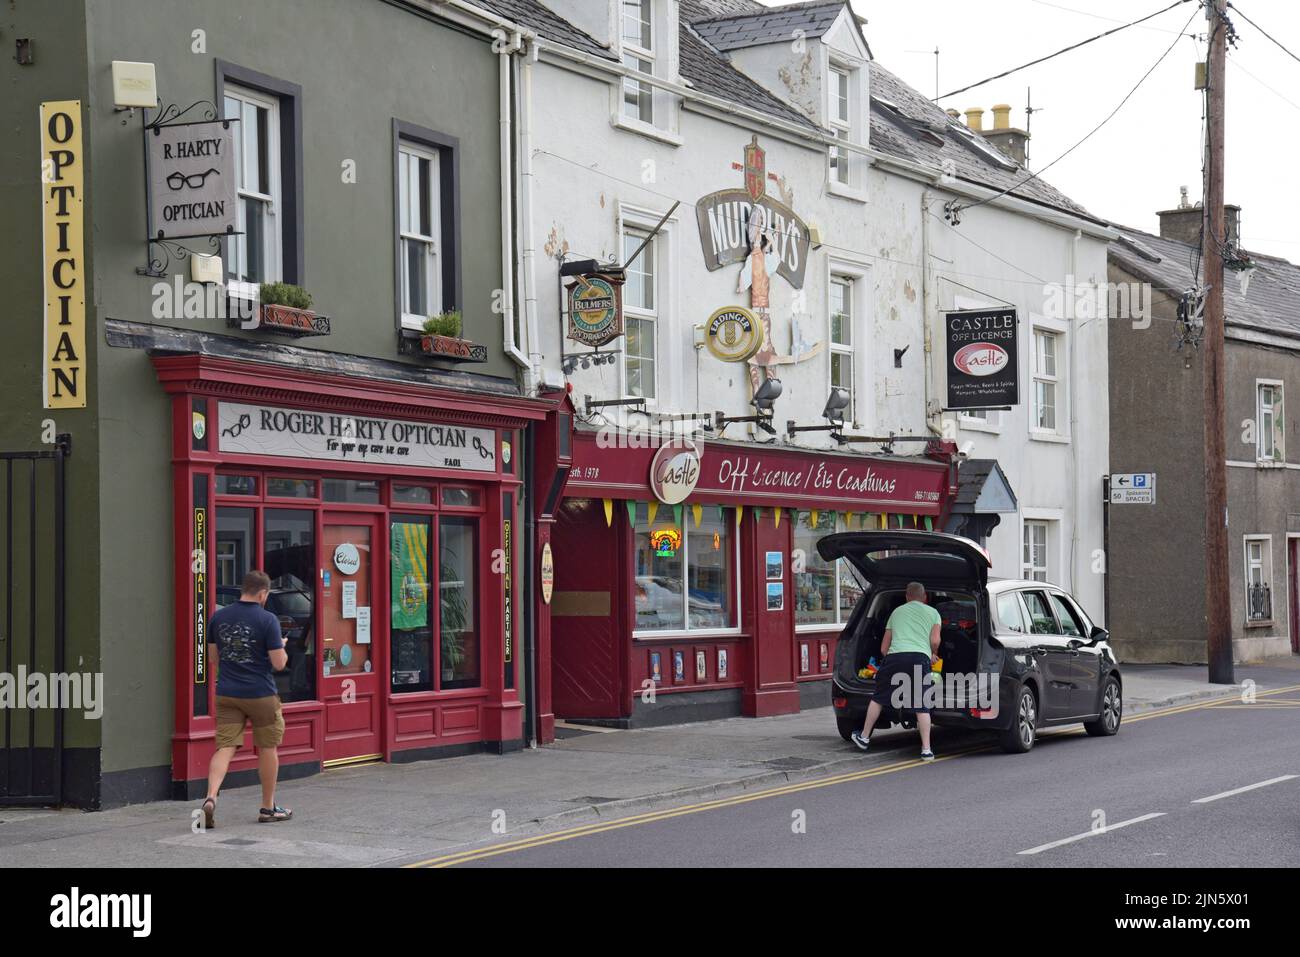 A man loads a car outside the Castle Off Licence, formerly a traditional Irish pub, in Tralee, County Kerry, Ireland Stock Photo